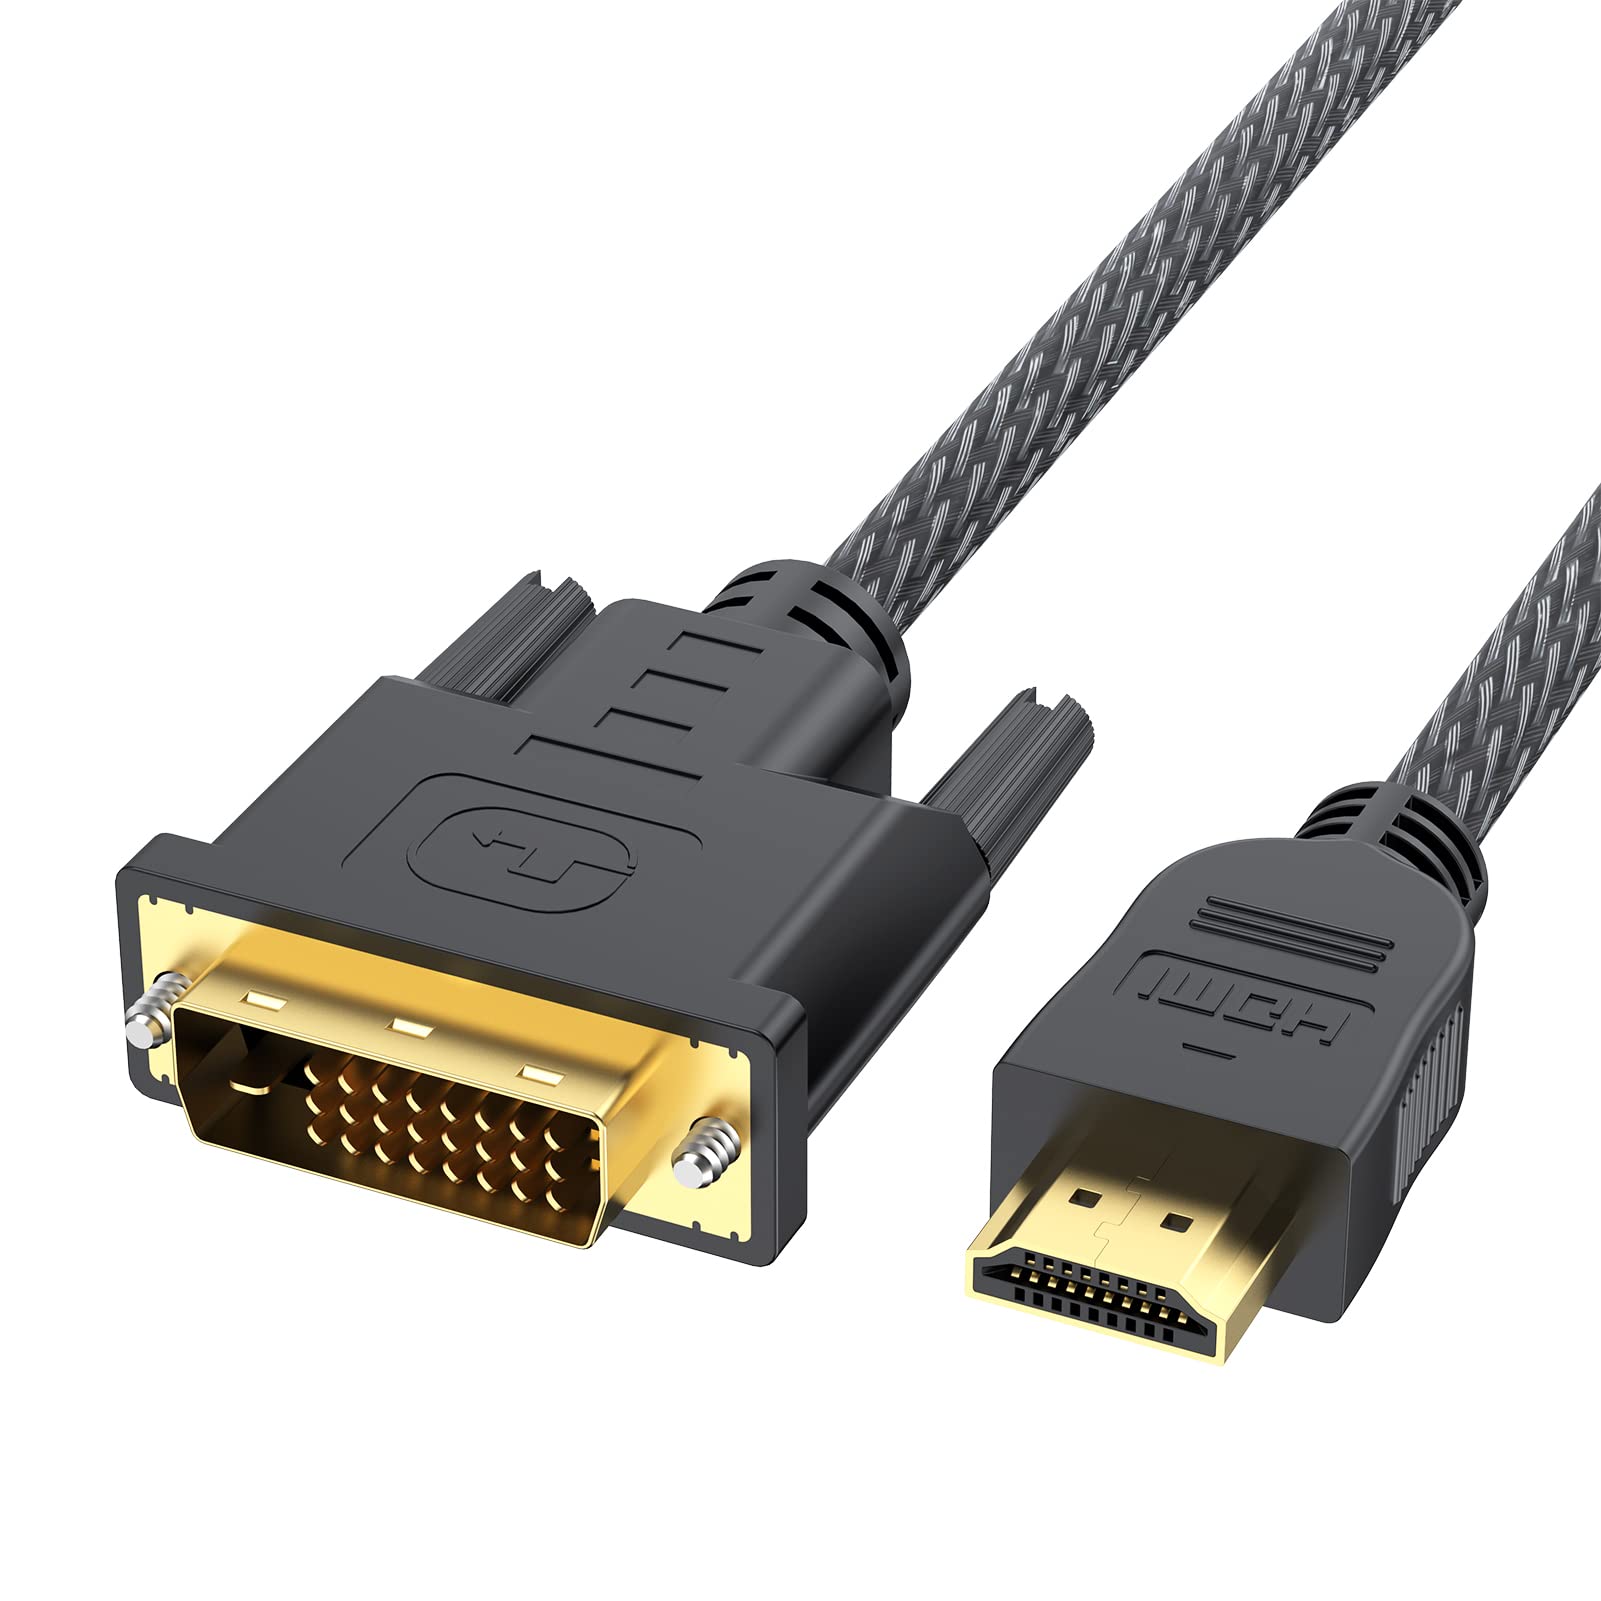 Unplugged HDMI and DVI cables